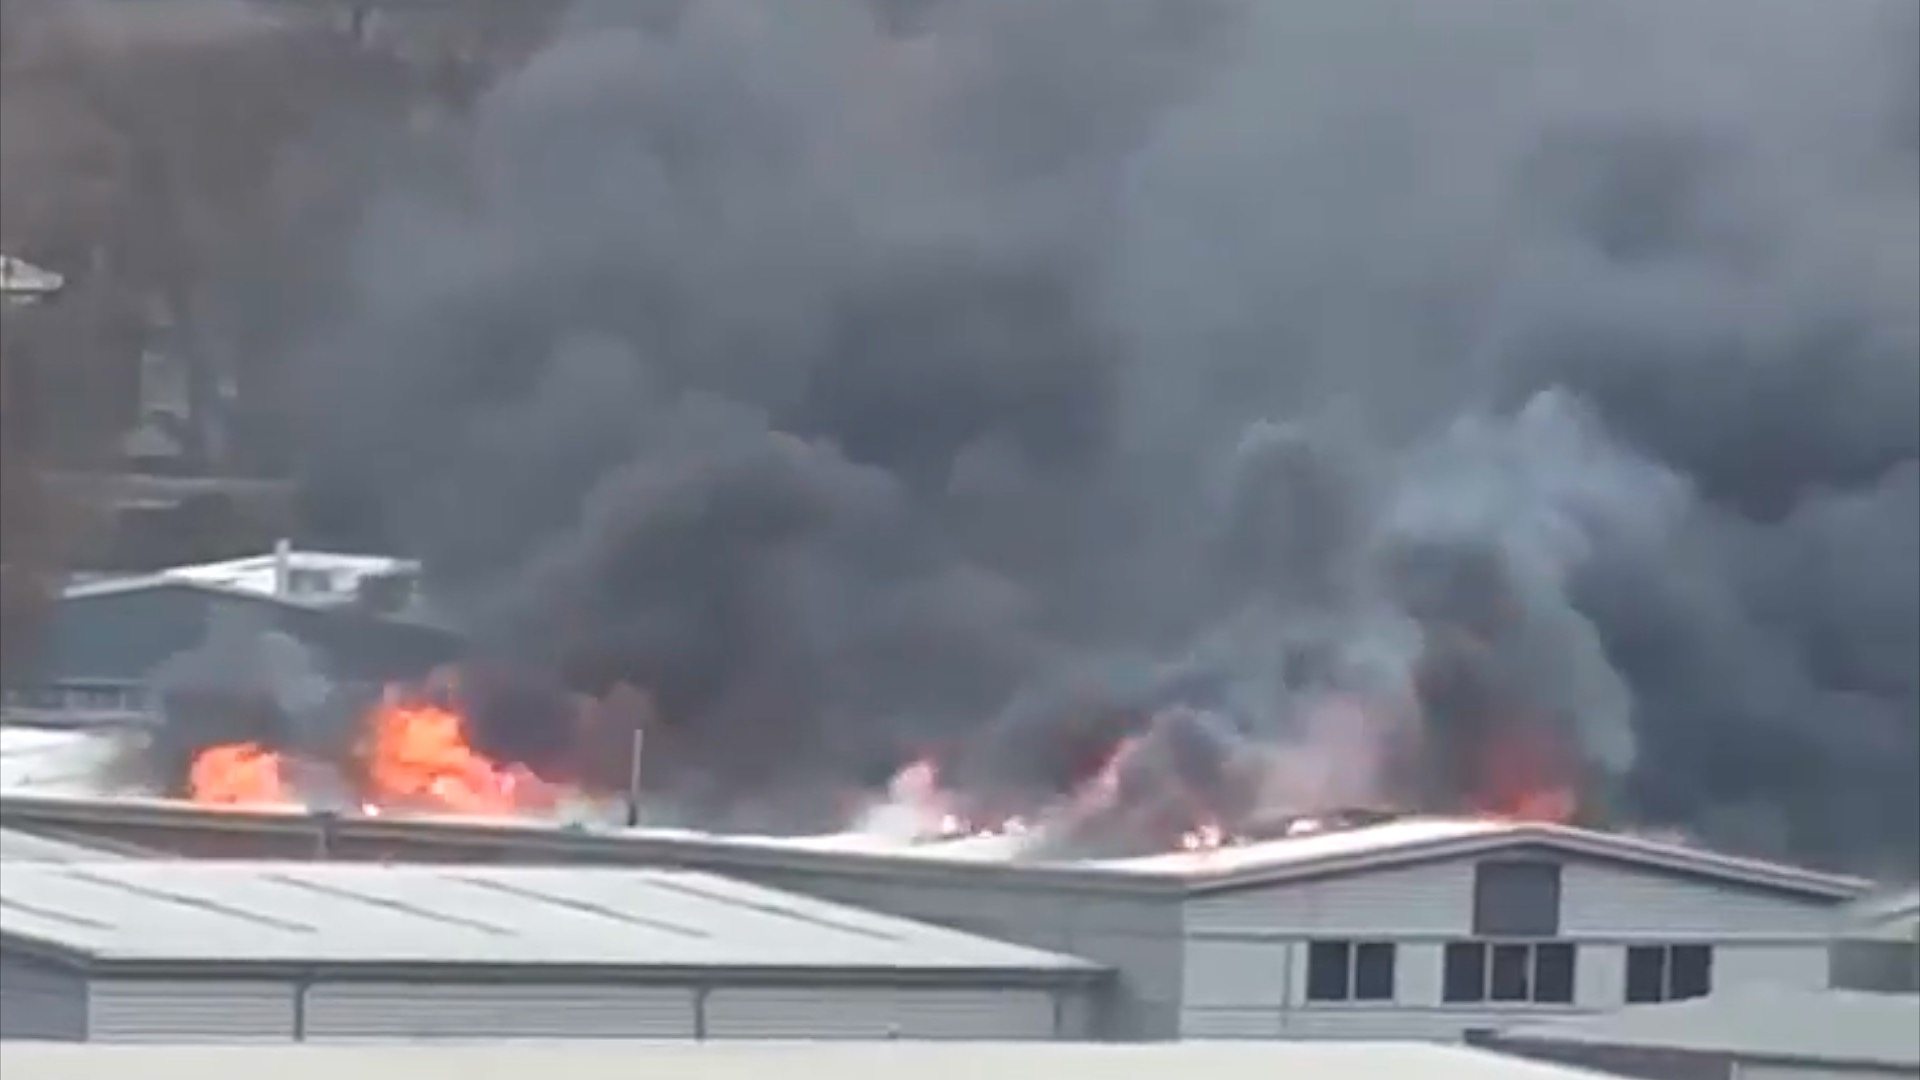 Video shows fire engulfing Andover furniture warehouse